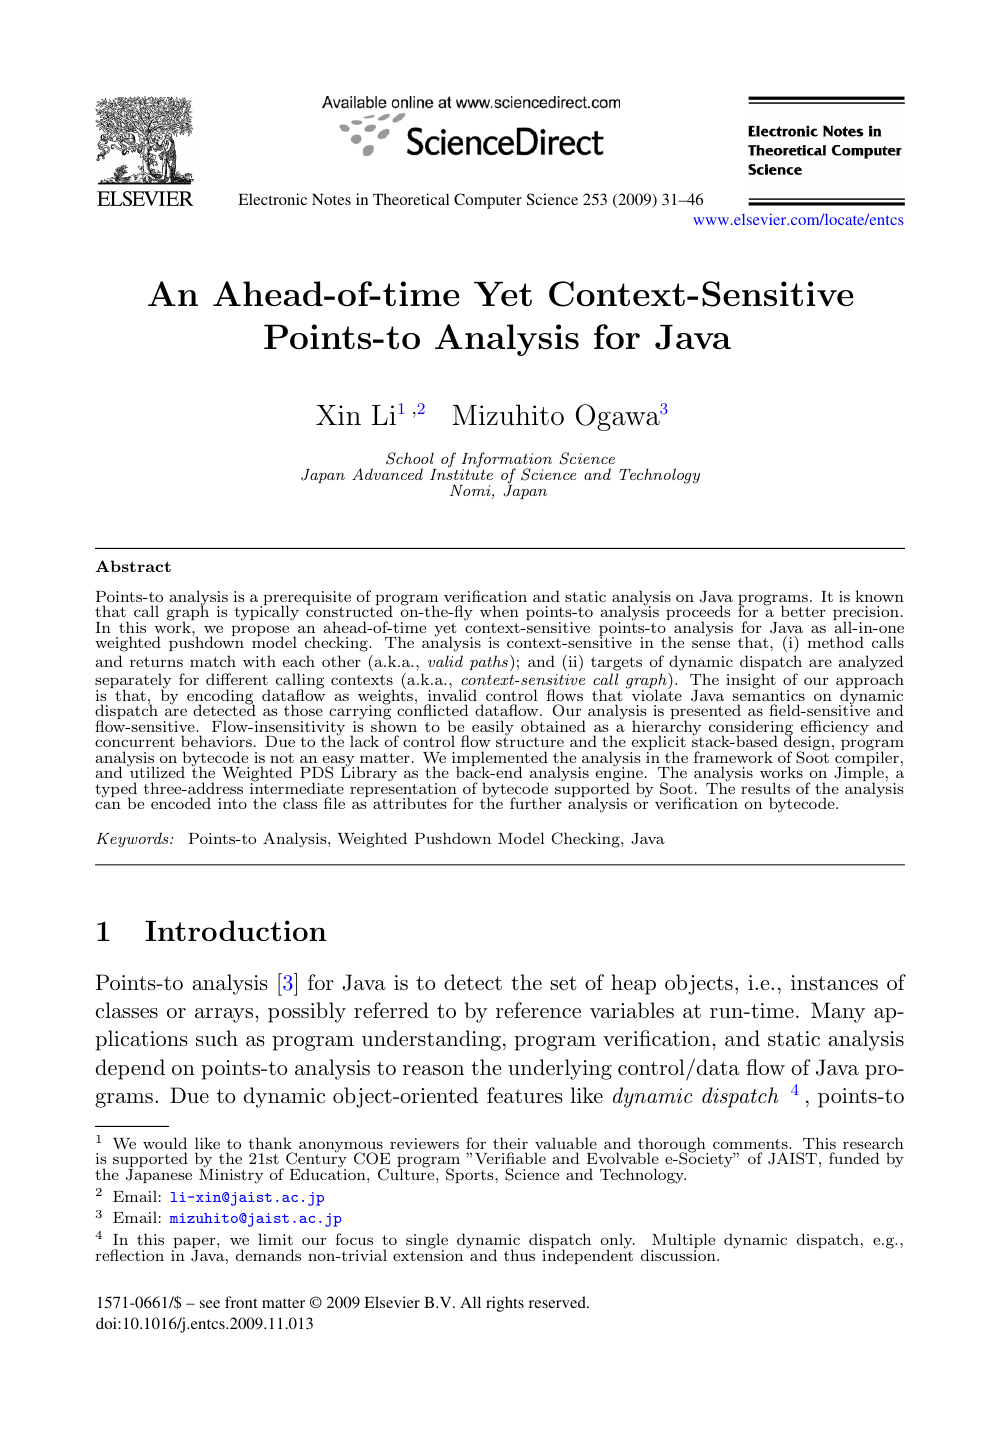 An Ahead Of Time Yet Context Sensitive Points To Analysis For Java Topic Of Research Paper In Computer And Information Sciences Download Scholarly Article Pdf And Read For Free On Cyberleninka Open Science Hub